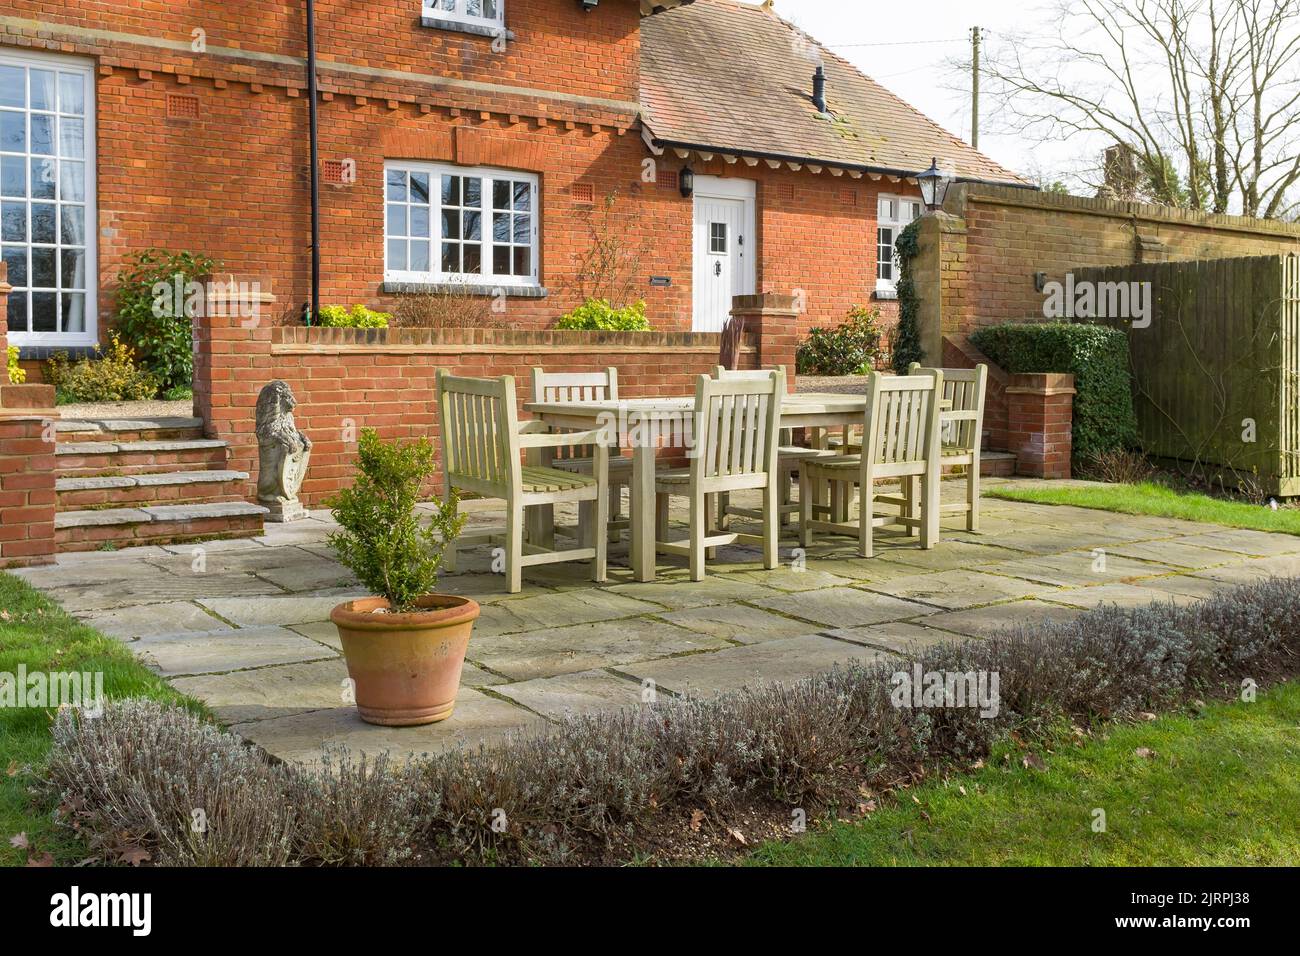 Garden patio in winter in an English garden. Paved terrace with teak furniture outside an old character house, UK Stock Photo